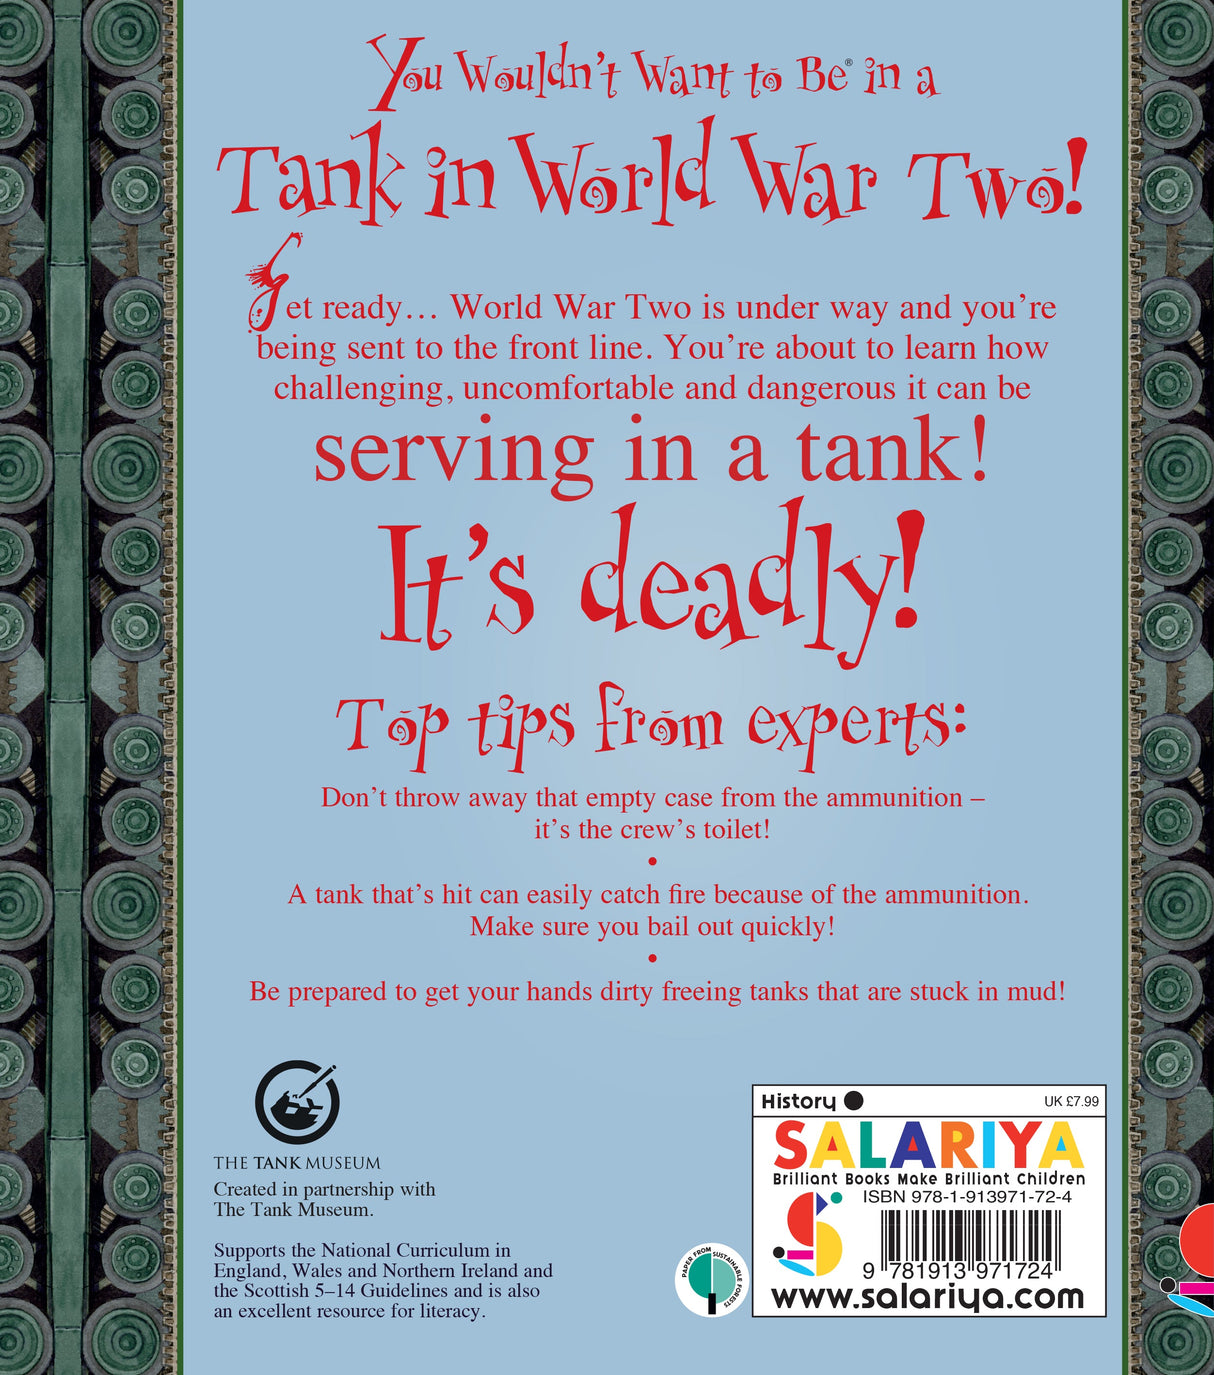 You Wouldn't Want To Be in a Tank in World War Two!